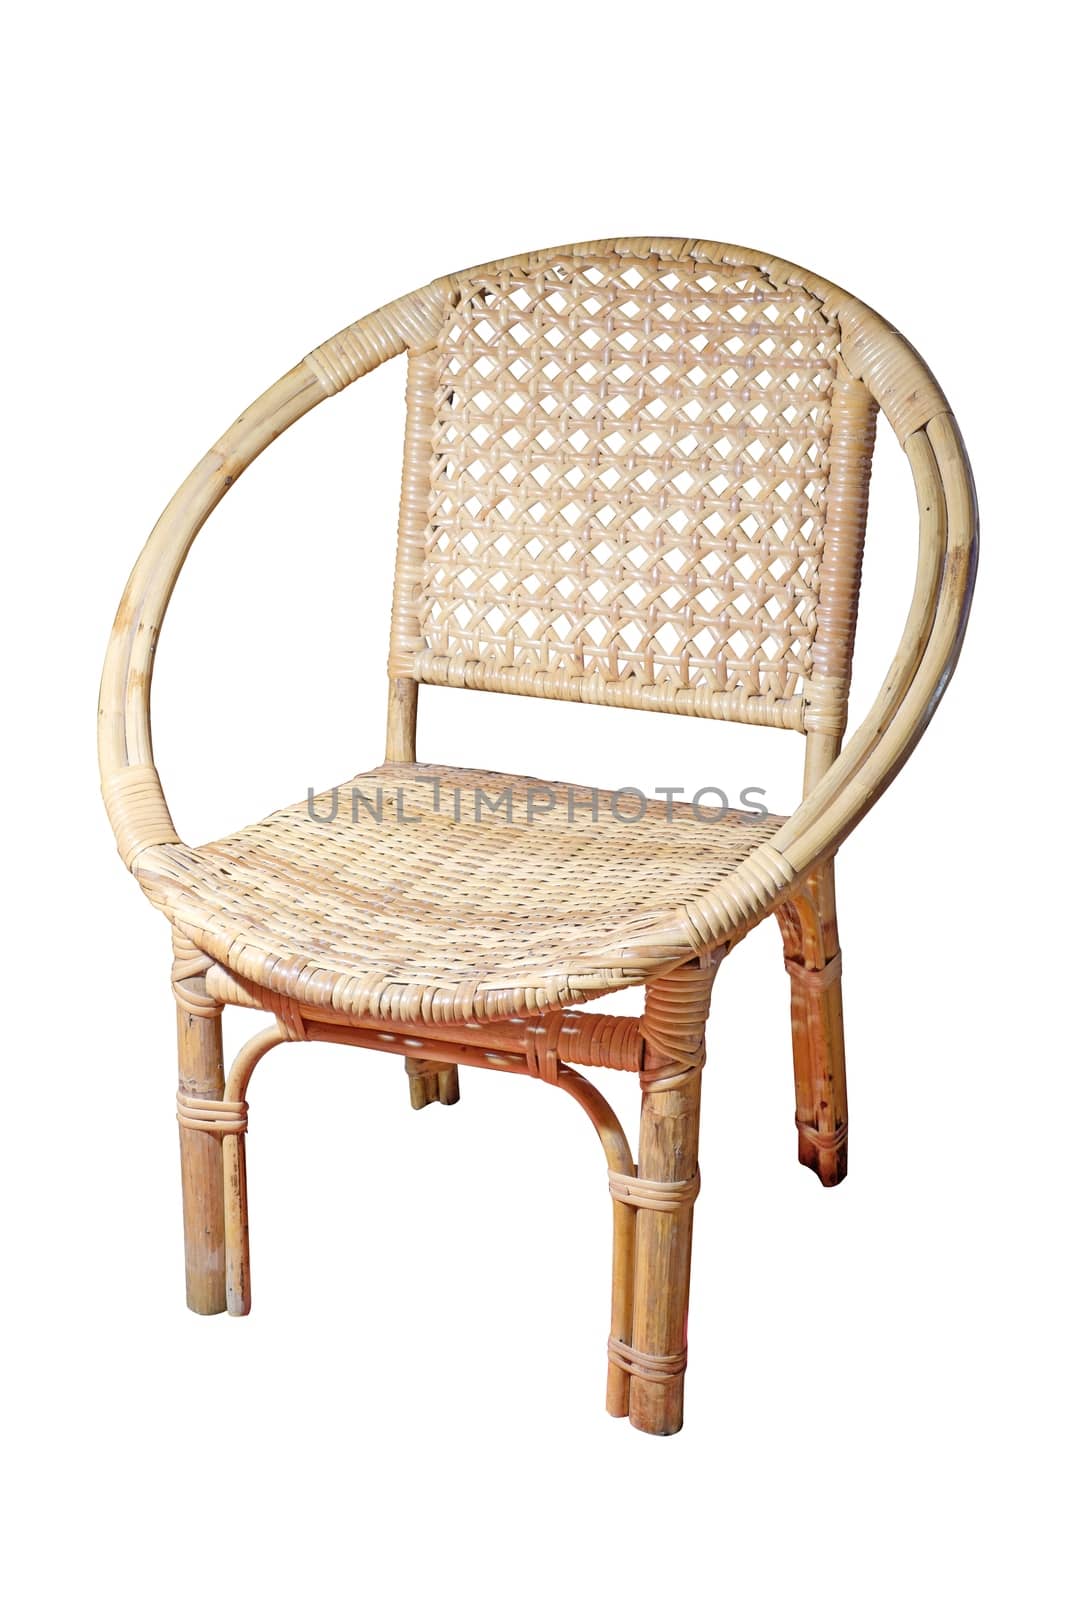 rattan chair, picture in isolate on white background